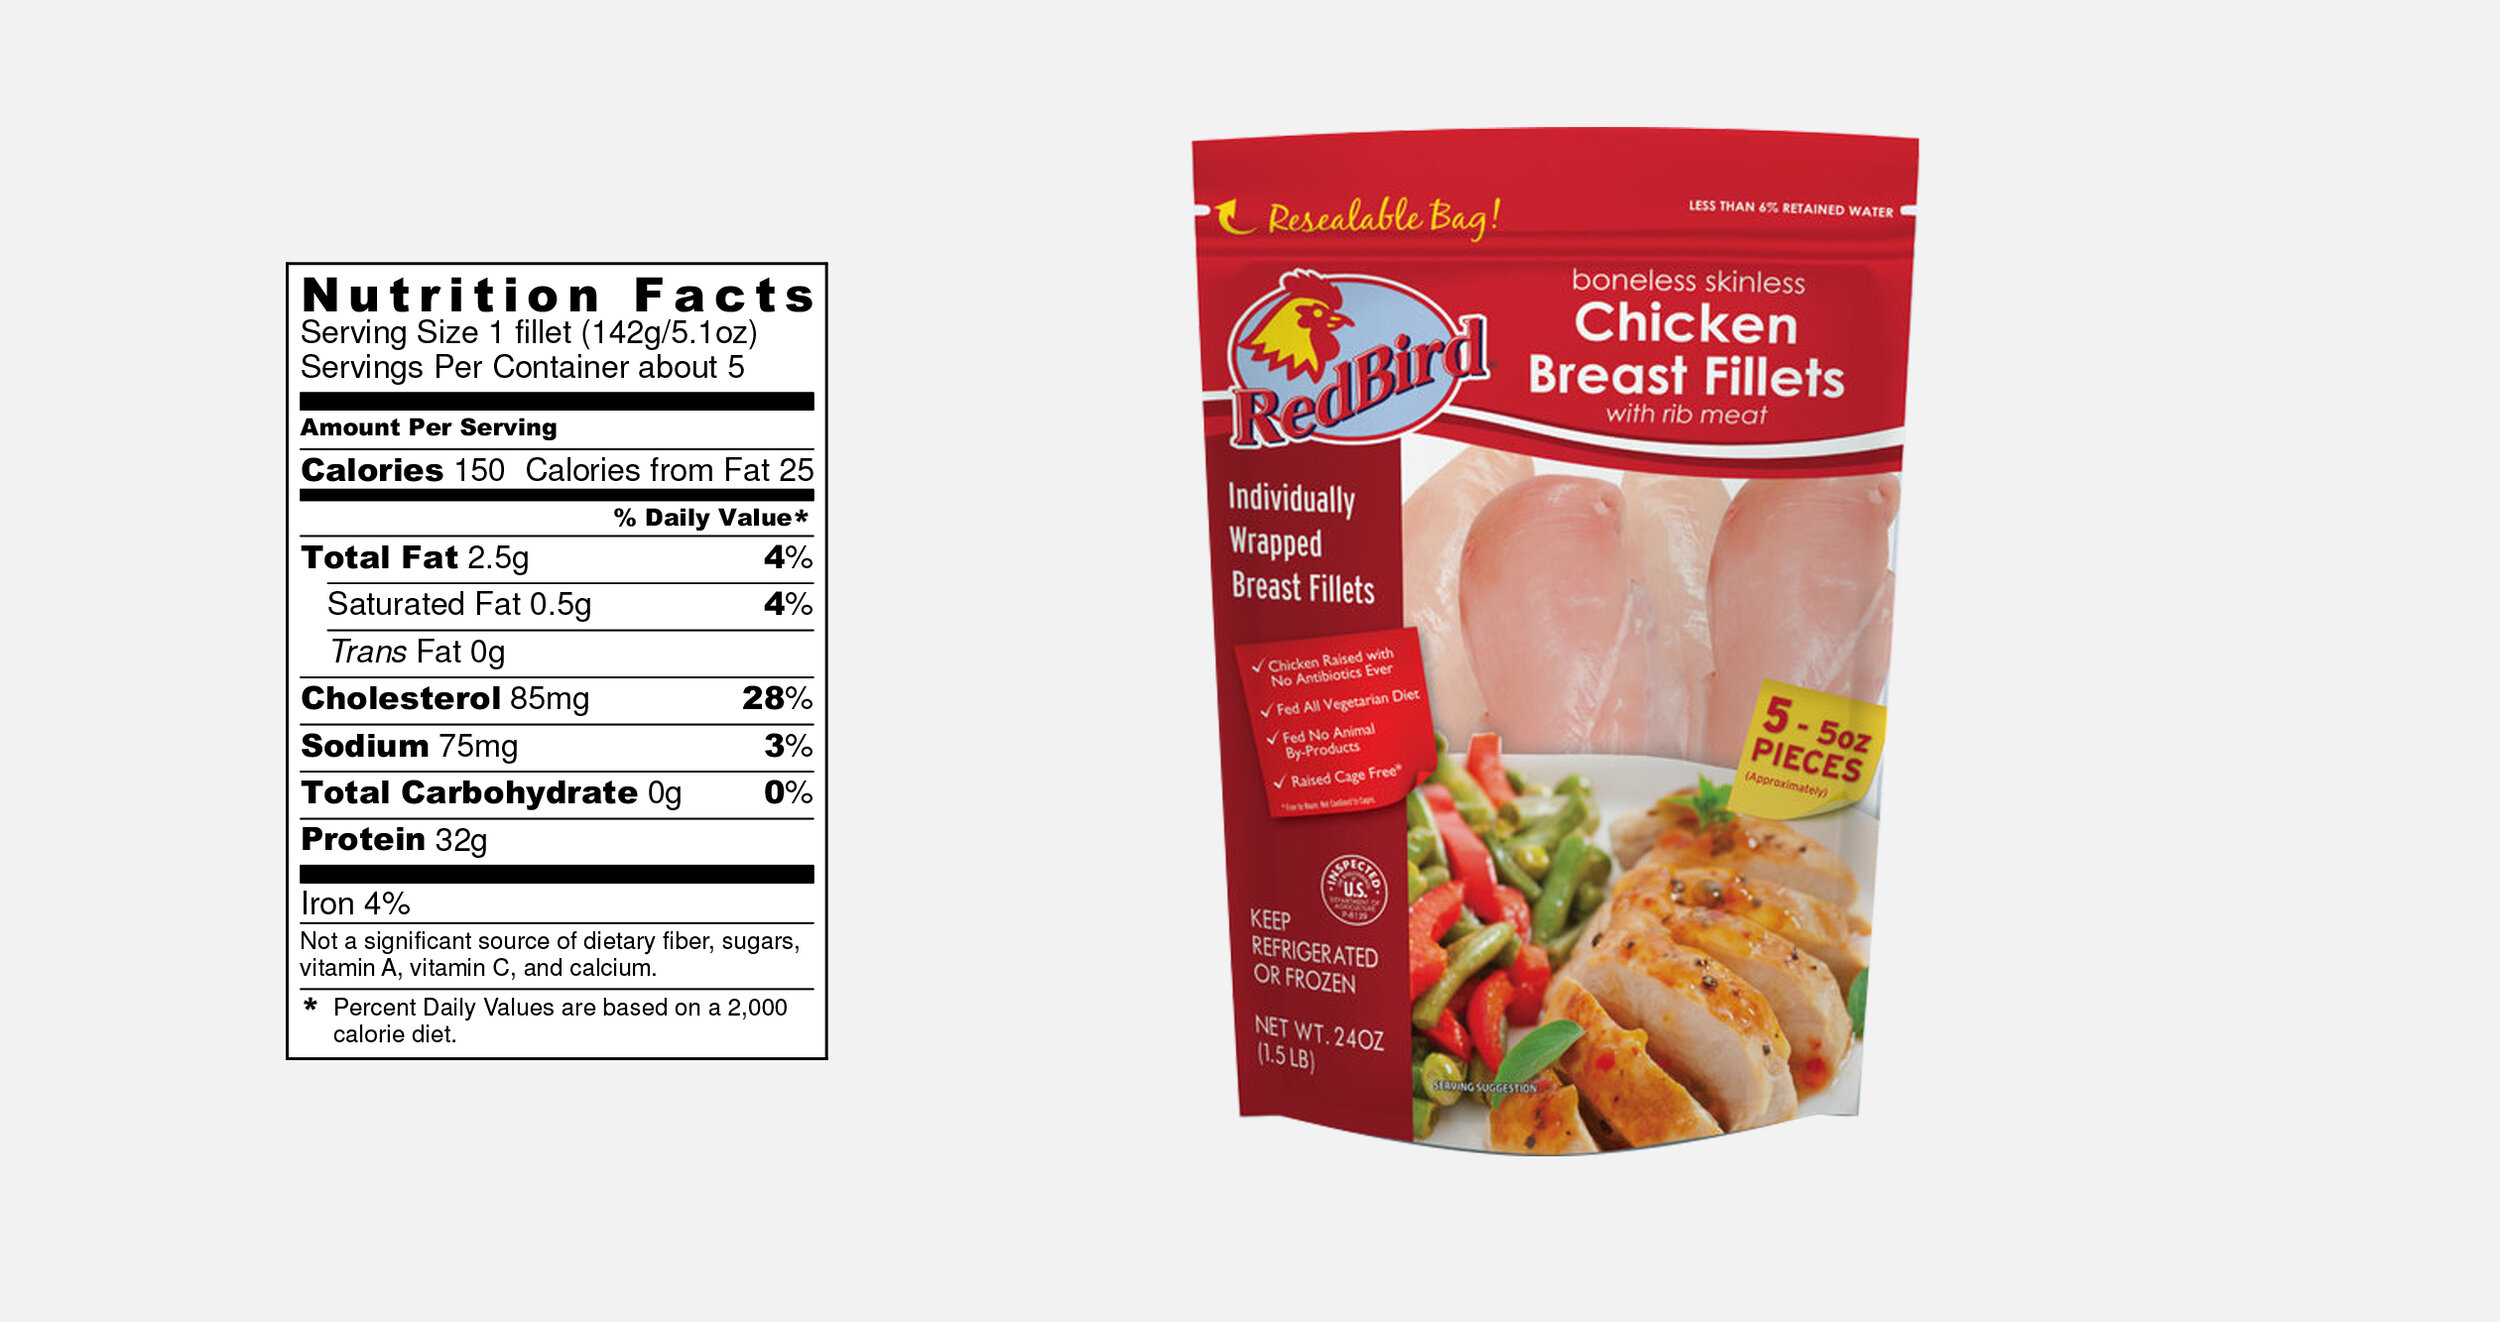 Antibiotic Free Red Bird Farms Individually Wrapped Brest Fillets